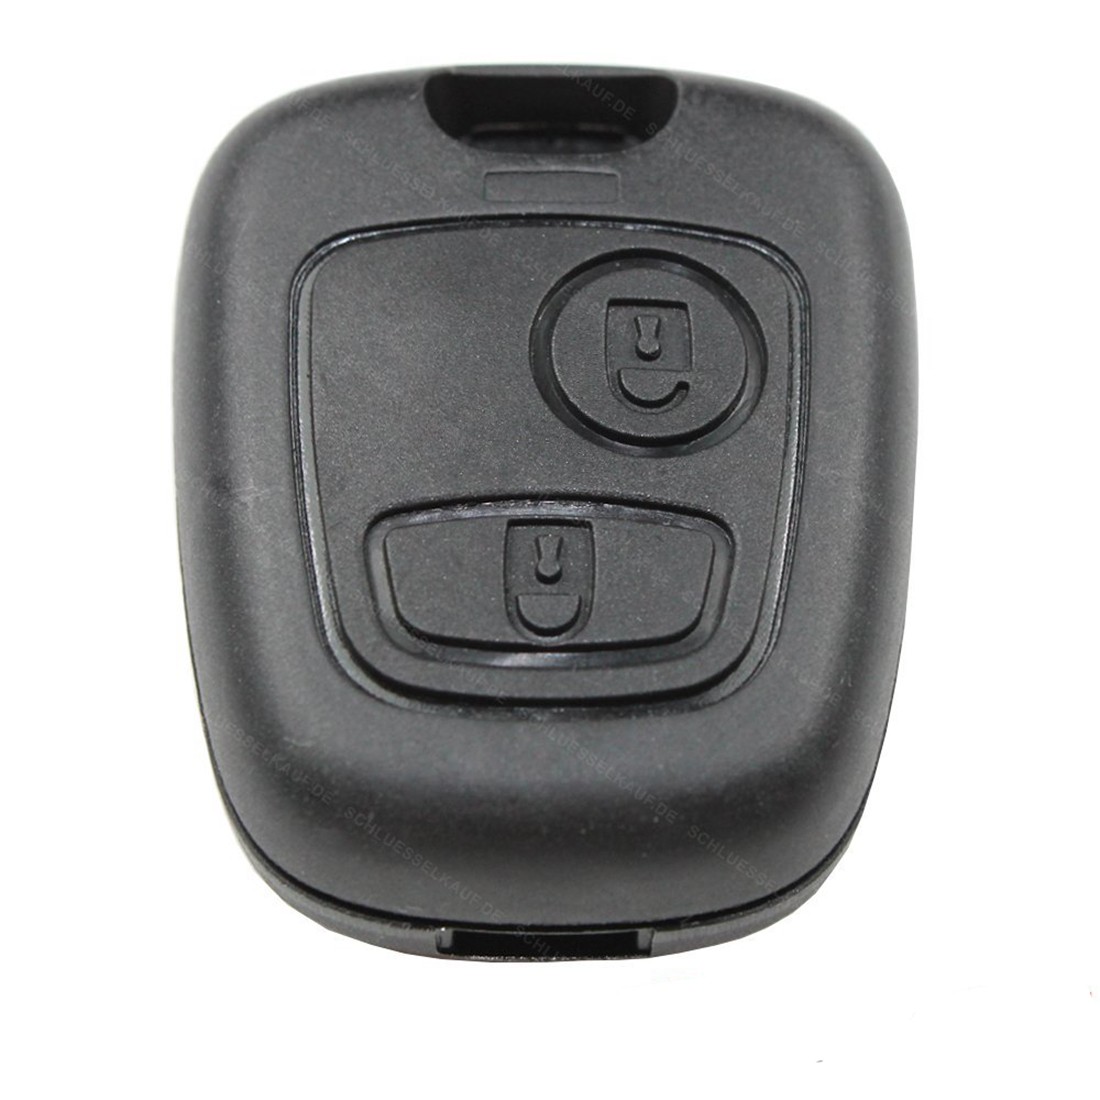 Black Replacement Entry Plastic Key Keyless Remote Fob Shell Case Housing for Peugeot 206 207 306